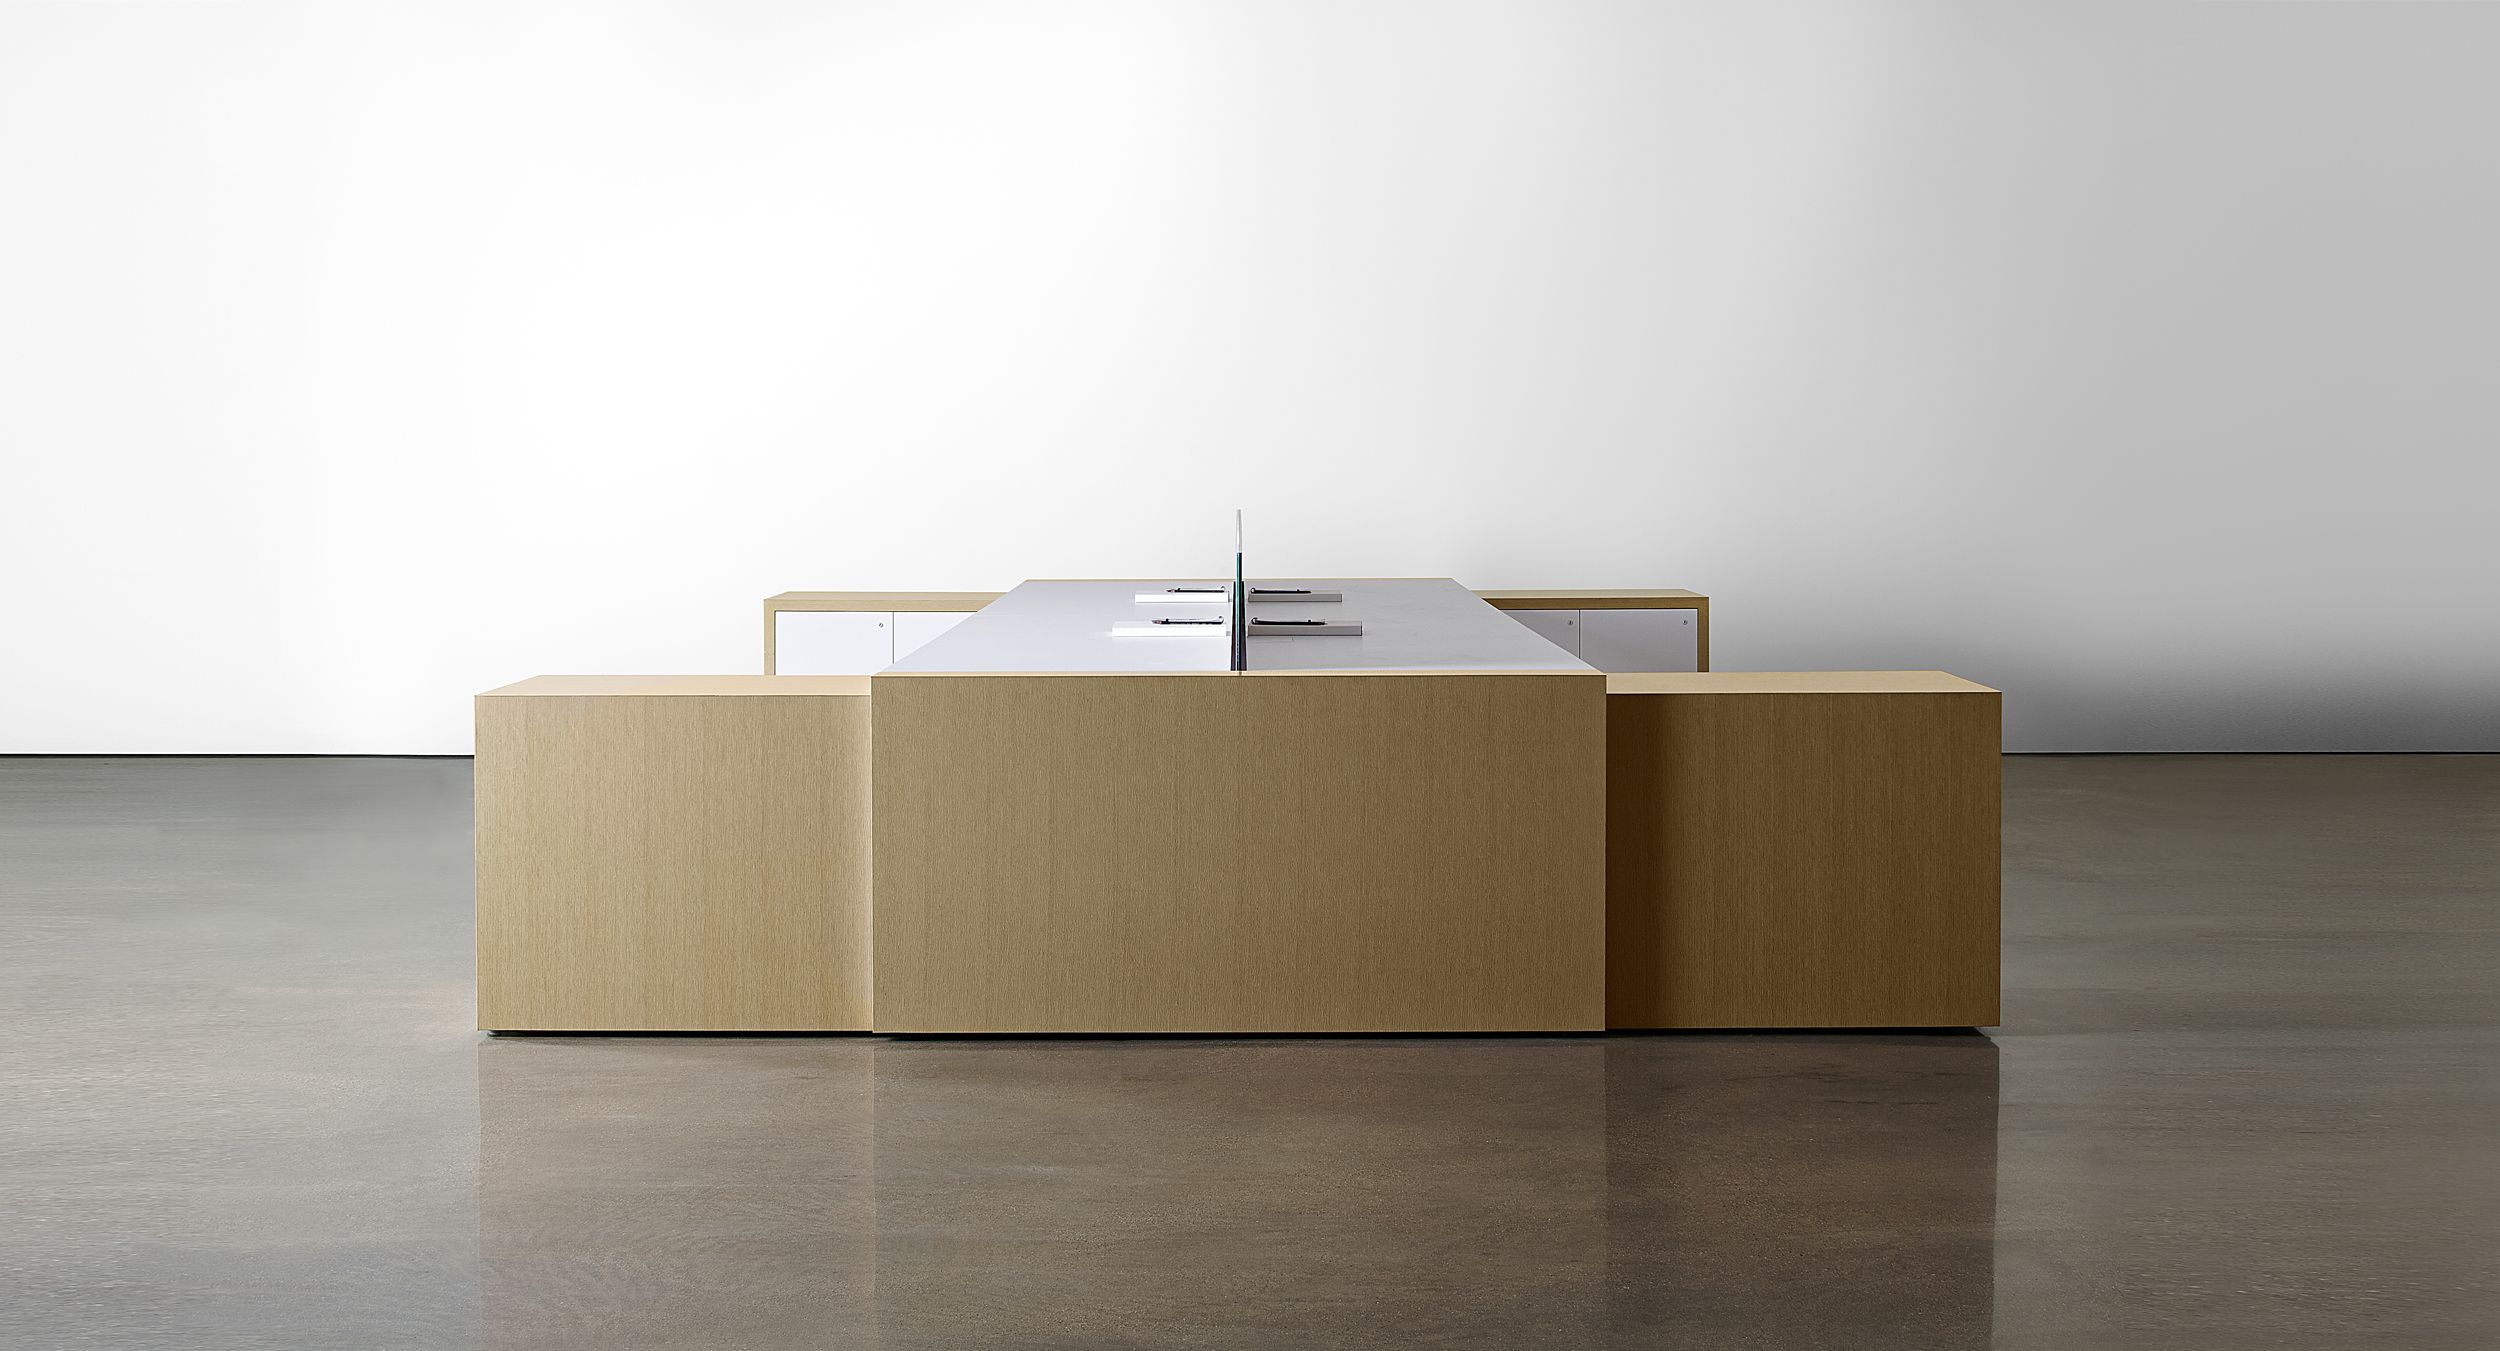 Perfectly mitered casework and joinery create pure modern forms.